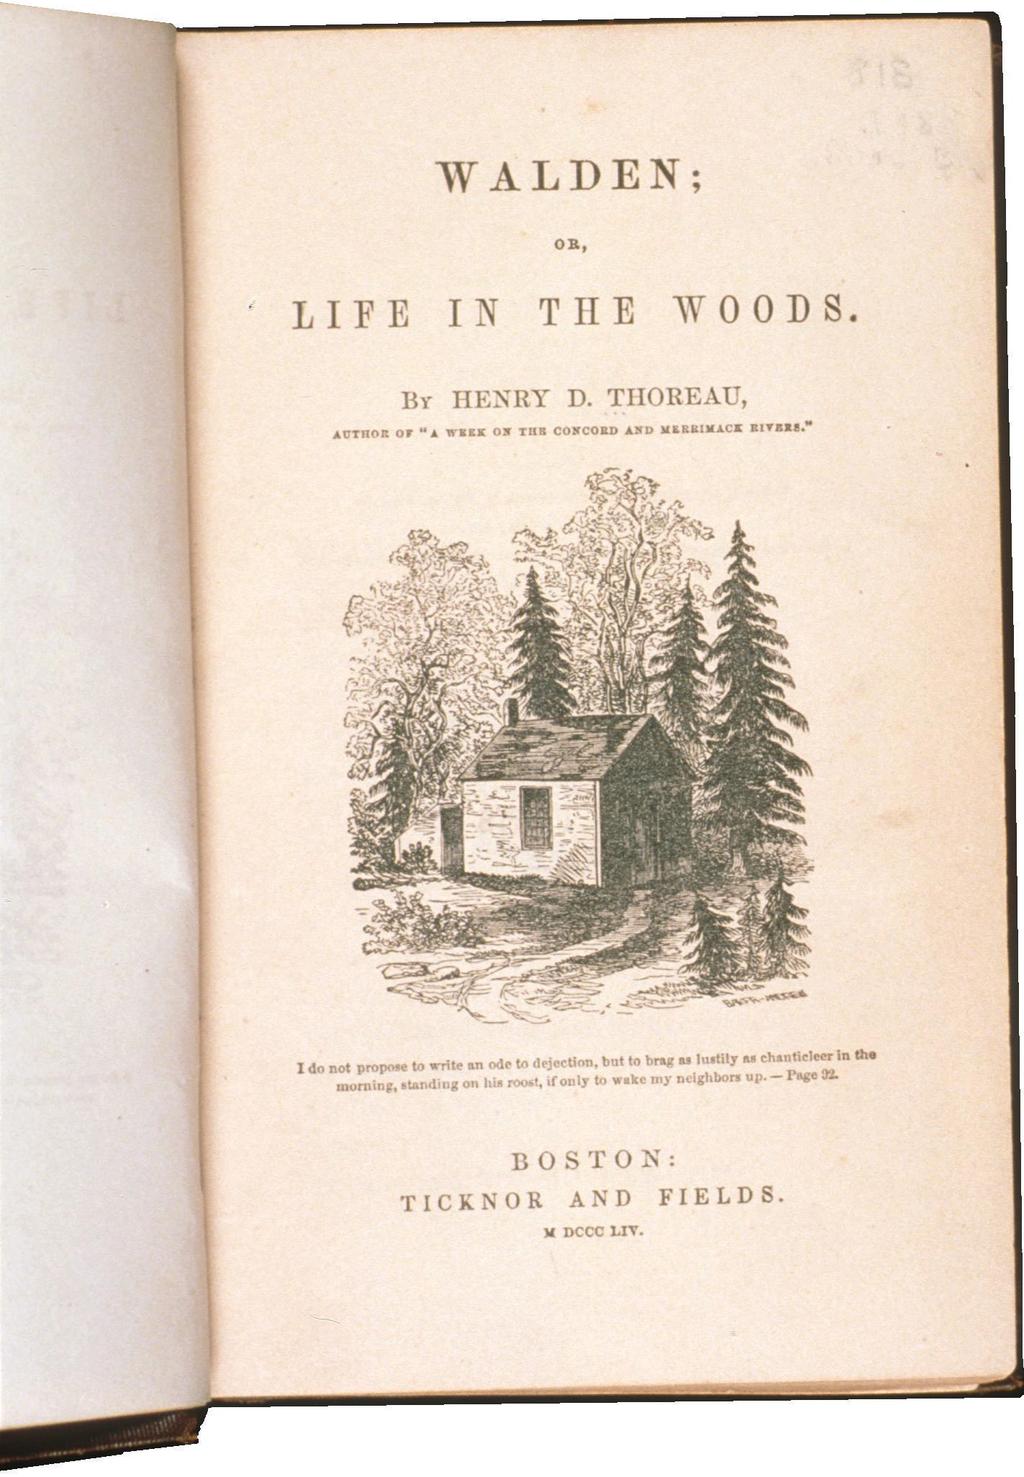 1854 July 3, Monday: In the afternoon Henry Thoreau went by boat to Hubbard s Bridge.